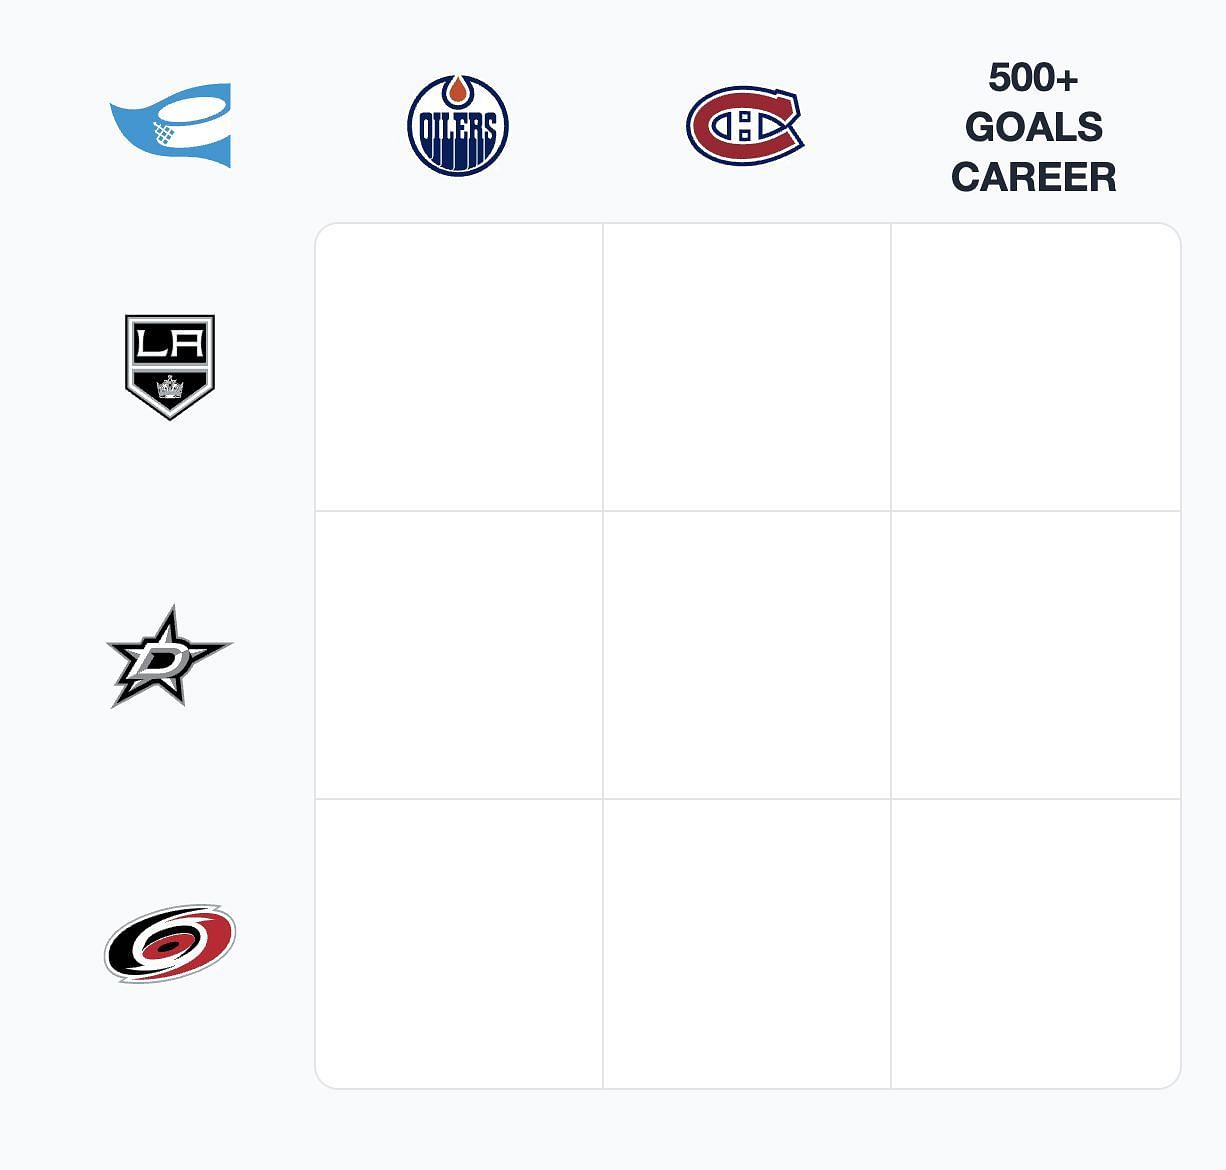 NHL Immaculate Grid answers for September 8